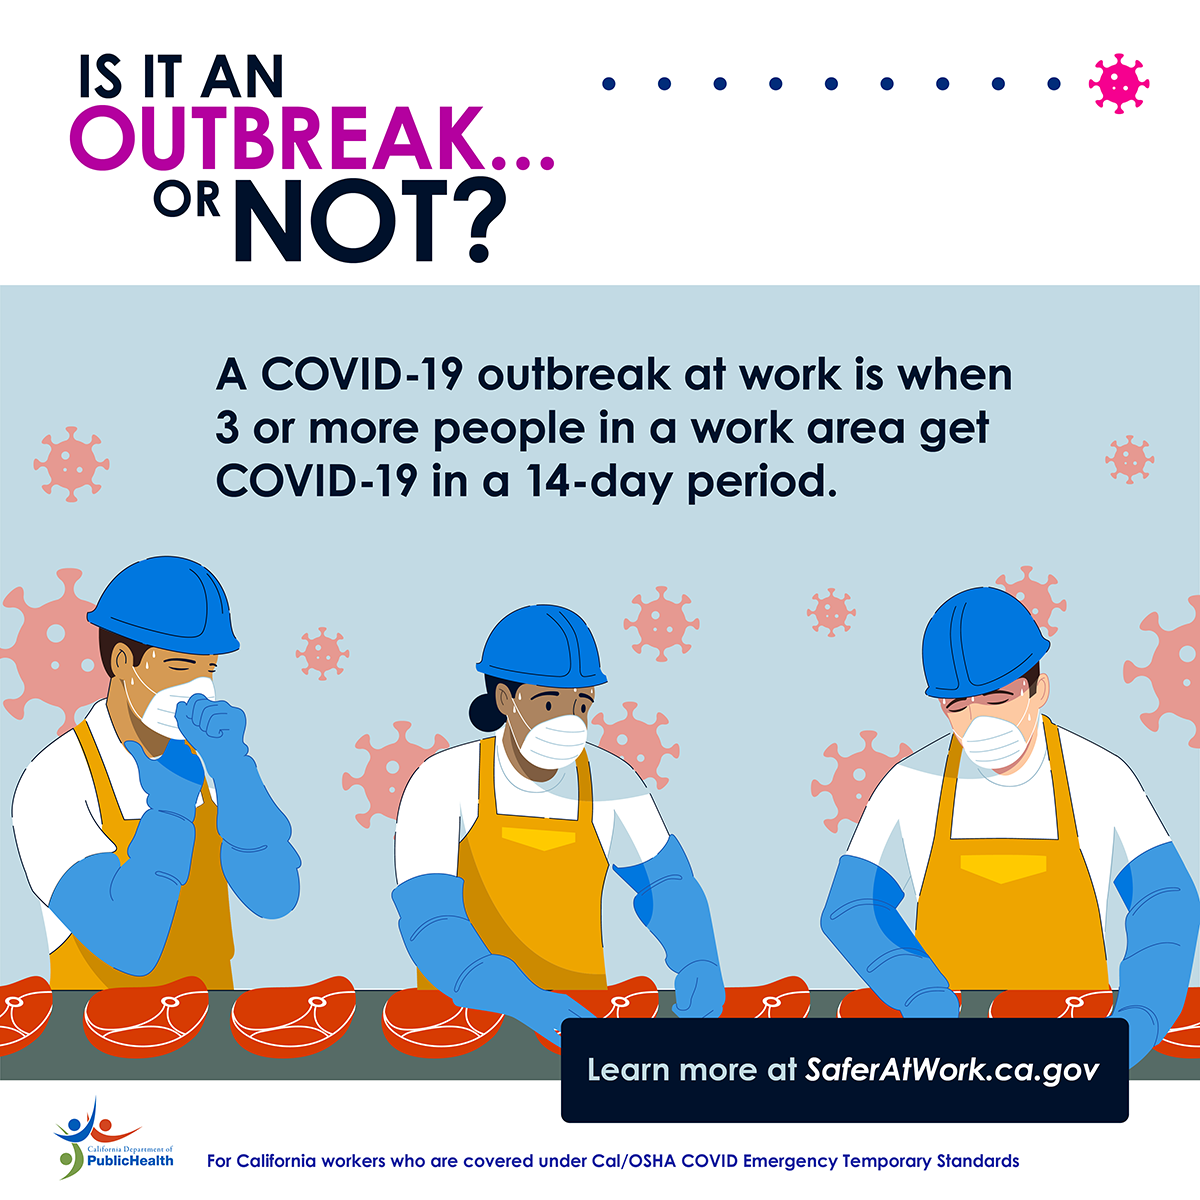 Is it an outbreak or not? A COVID-19 outbreak at work is when 3 or more people in a work area get COVID-19 in a 14-day period.